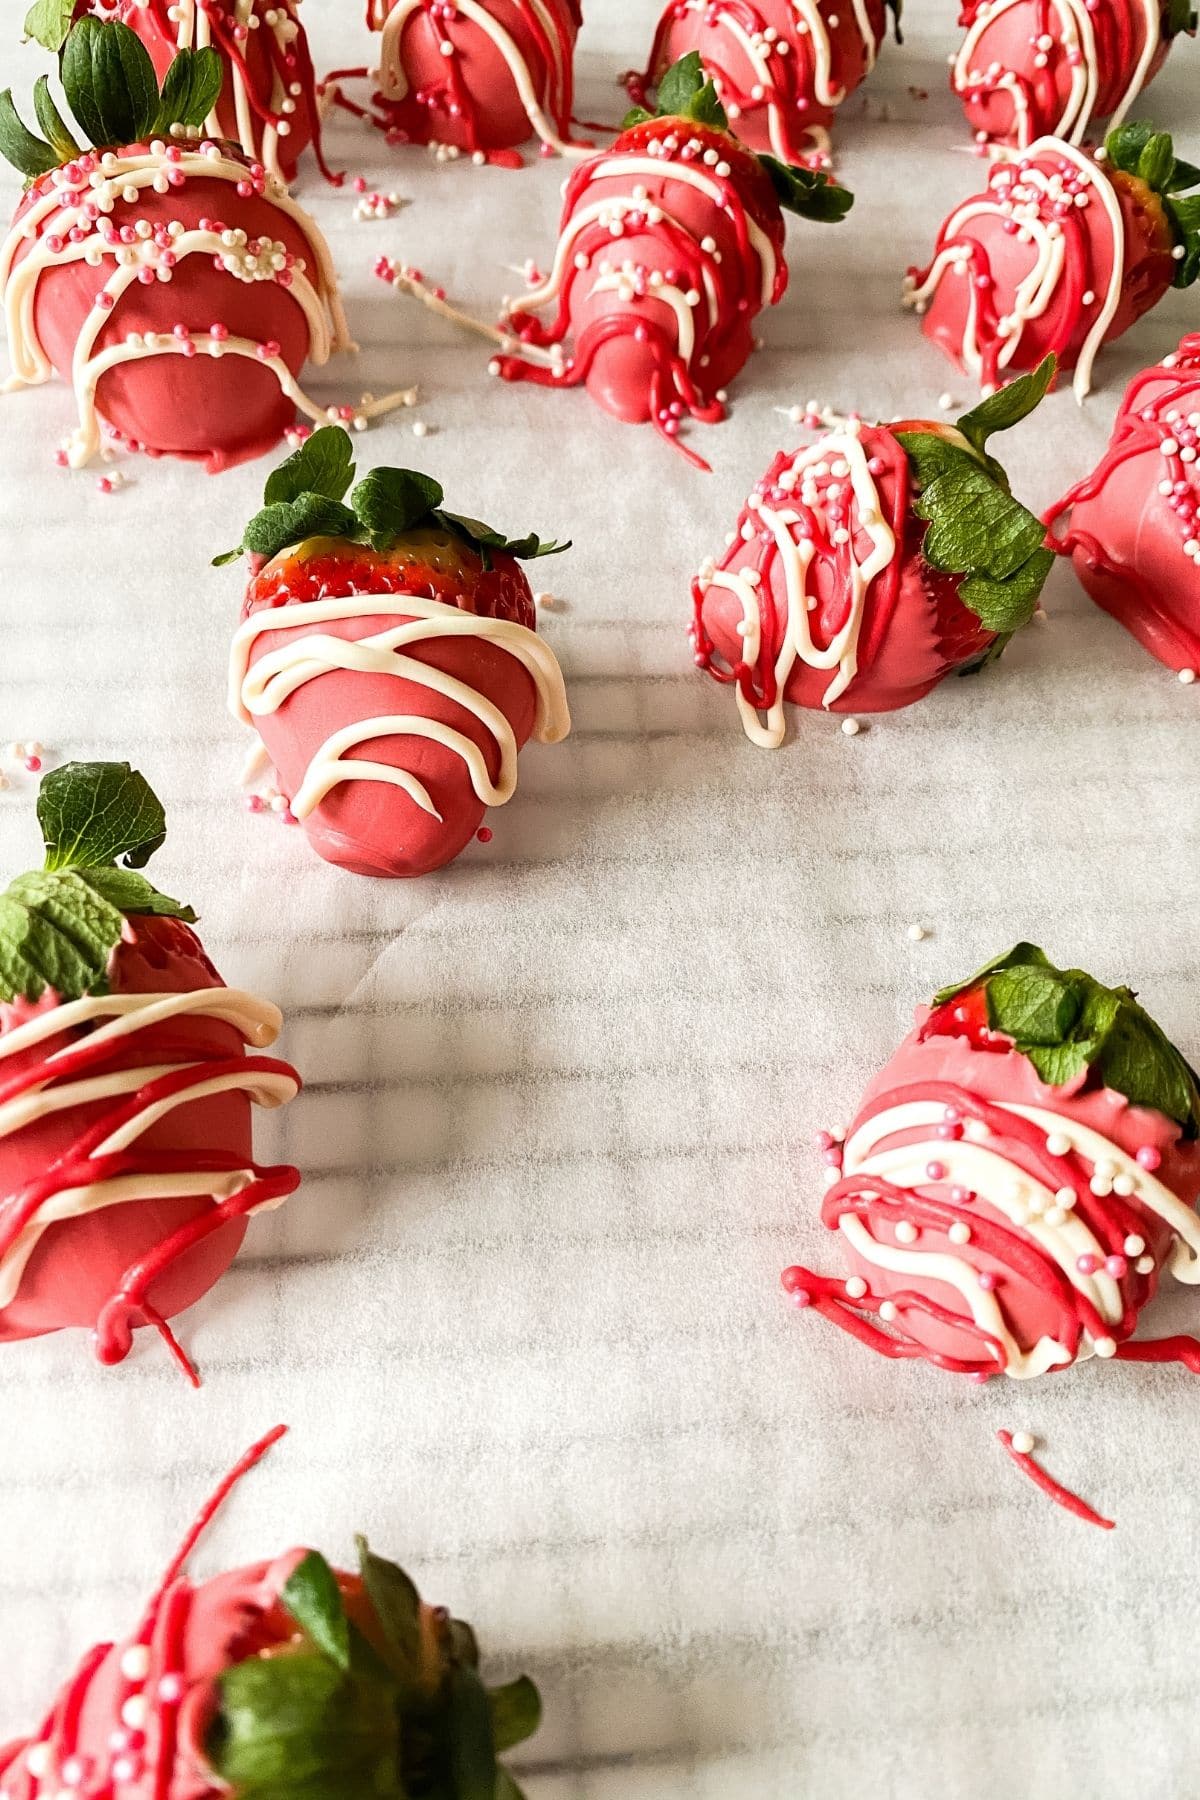 Dipped strawberries on parchment